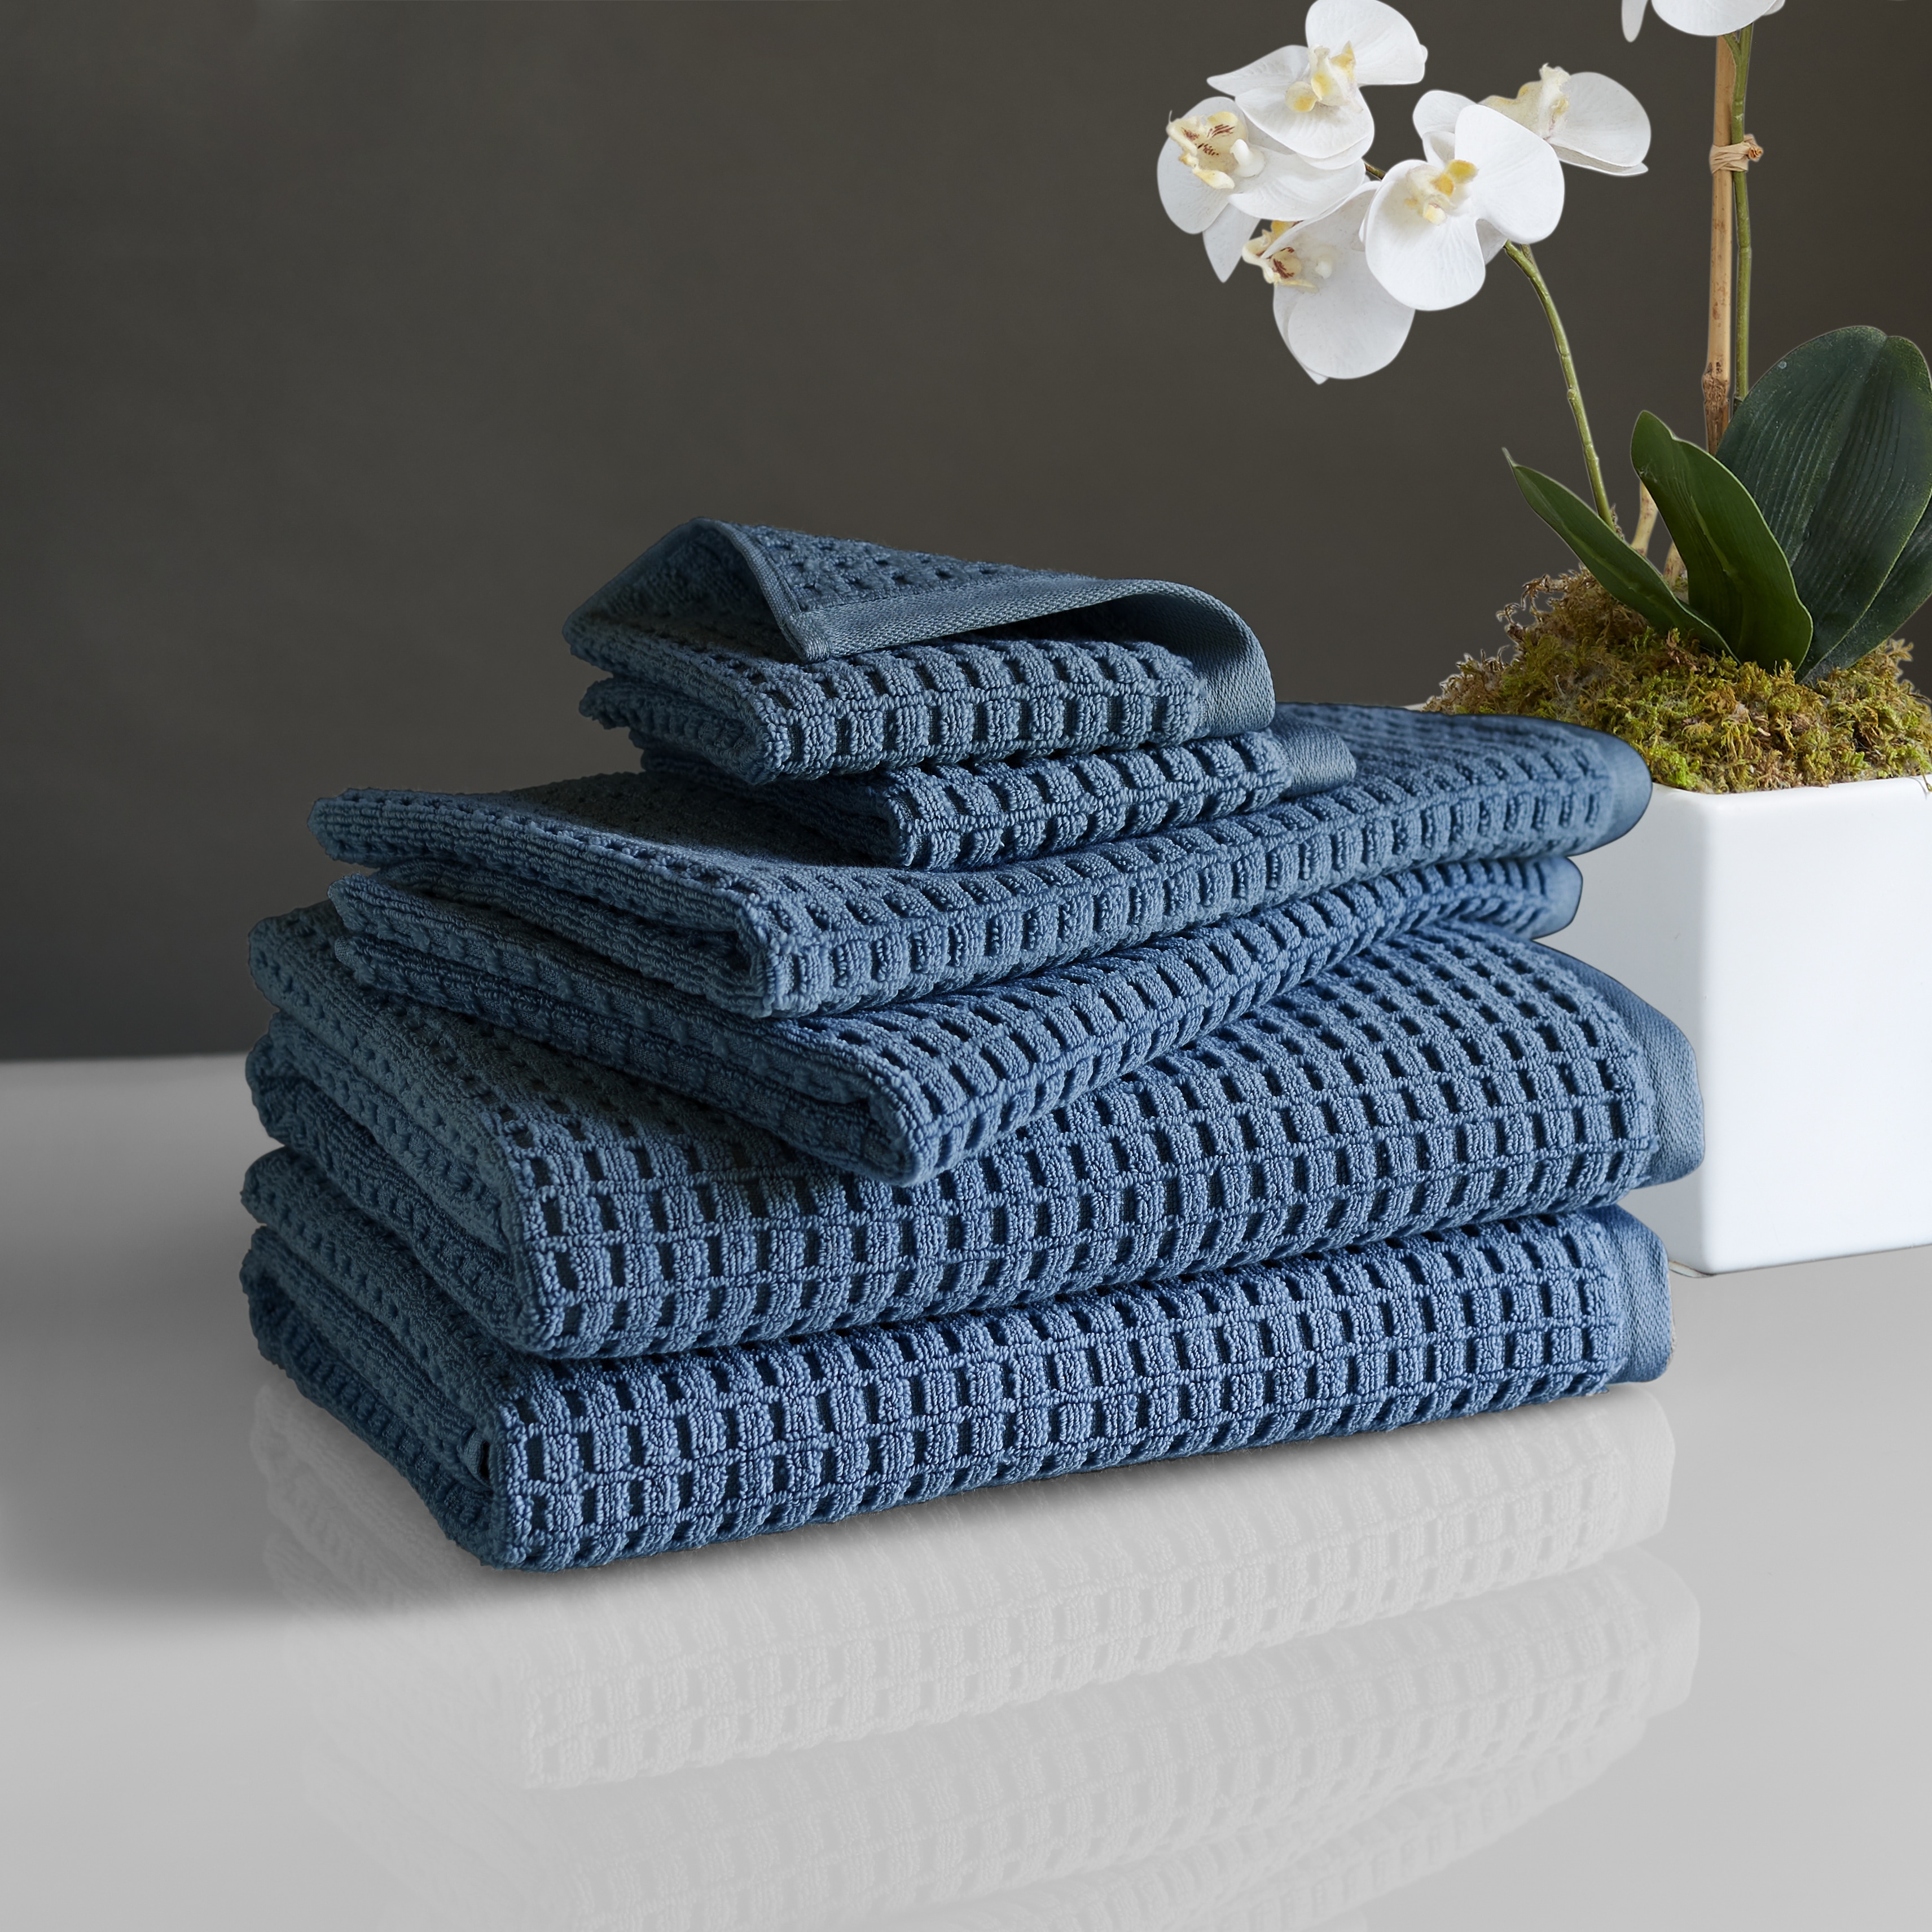 https://ak1.ostkcdn.com/images/products/is/images/direct/60b56c82dd3c3a8086326fdcf829ff518995f923/DKNY-Quick-Dry-6-pc-Towel-Set.jpg